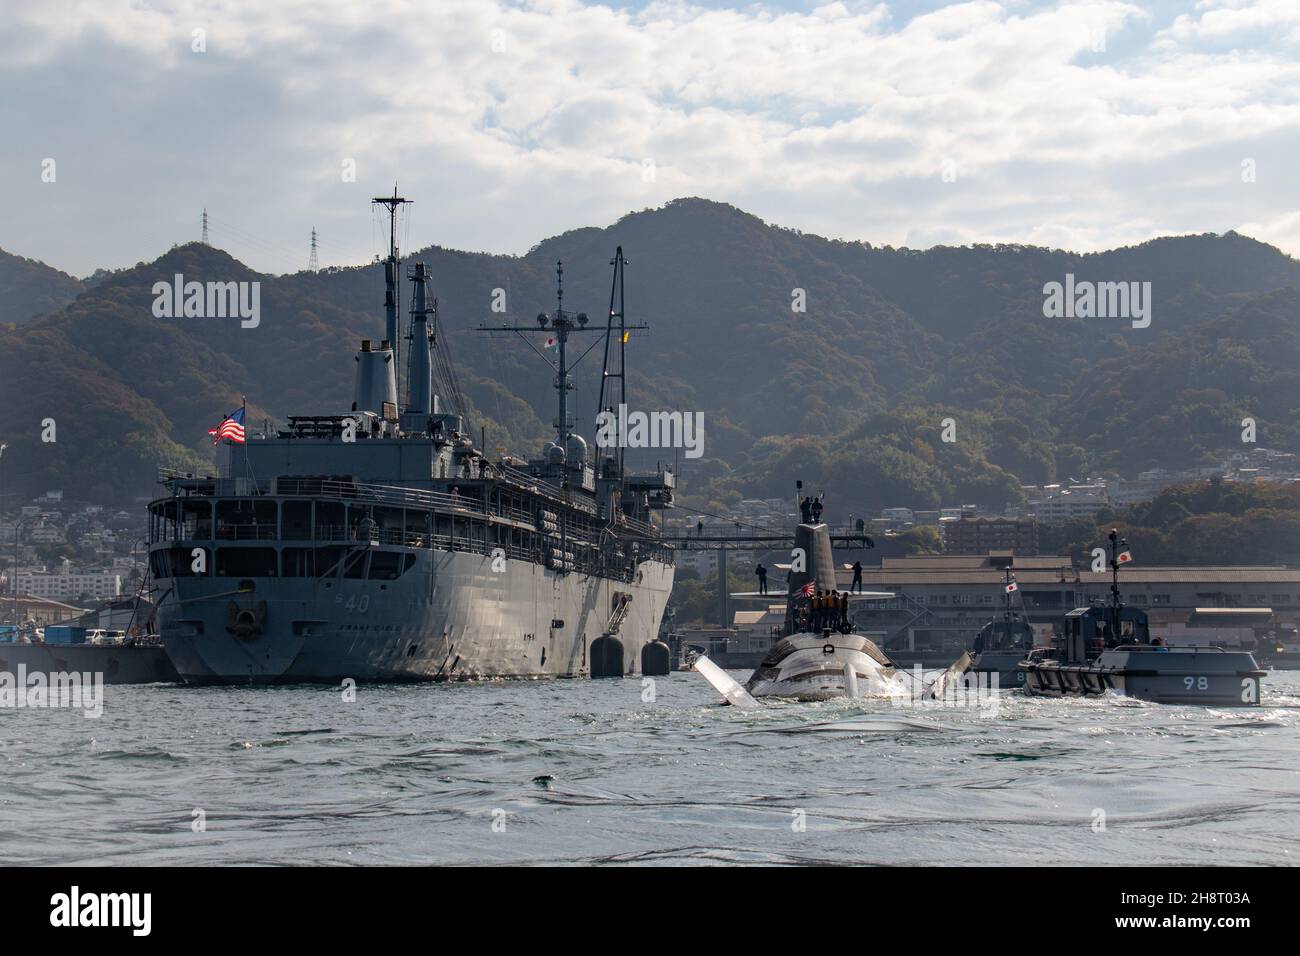 KURE, Japan (Nov. 25, 2021) The Soryu-class submarine JS Sekiryu (SS 508) prepares to moor alongside the Emory S. Land-class submarine tender USS Frank Cable (AS 40) Nov. 25. Frank Cable is moored at the JMSDF Kure Naval Base, Japan, as part of their patrol conducting expeditionary maintenance and logistics in support of national security in the U.S. 7th Fleet area of operations. (U.S. Navy photo by Mass Communication Specialist 2nd Class Chase Stephens/Released) Stock Photo